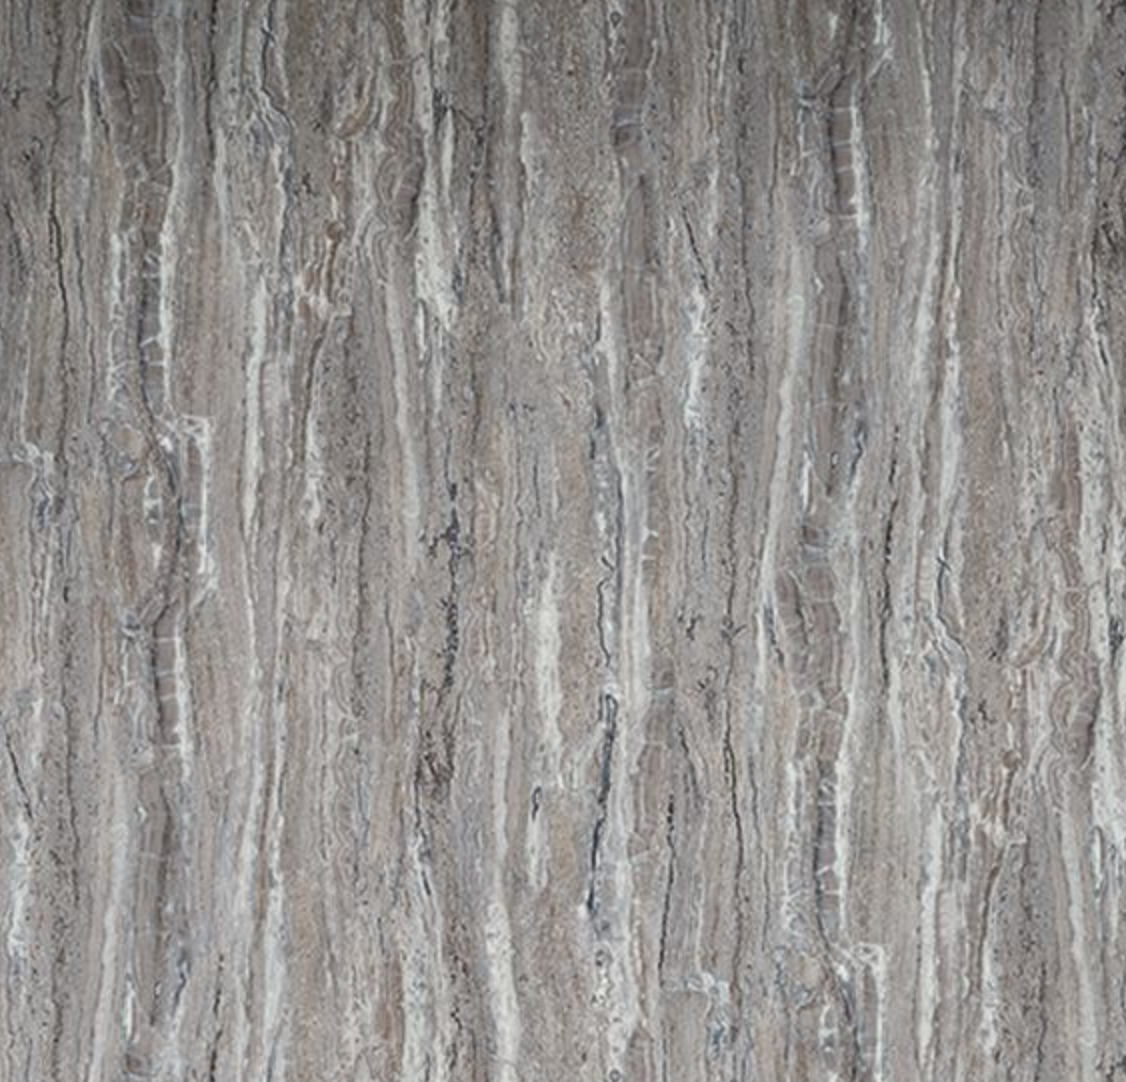 Showerwall Laminate Quarry Collection - Blue Toned Stone